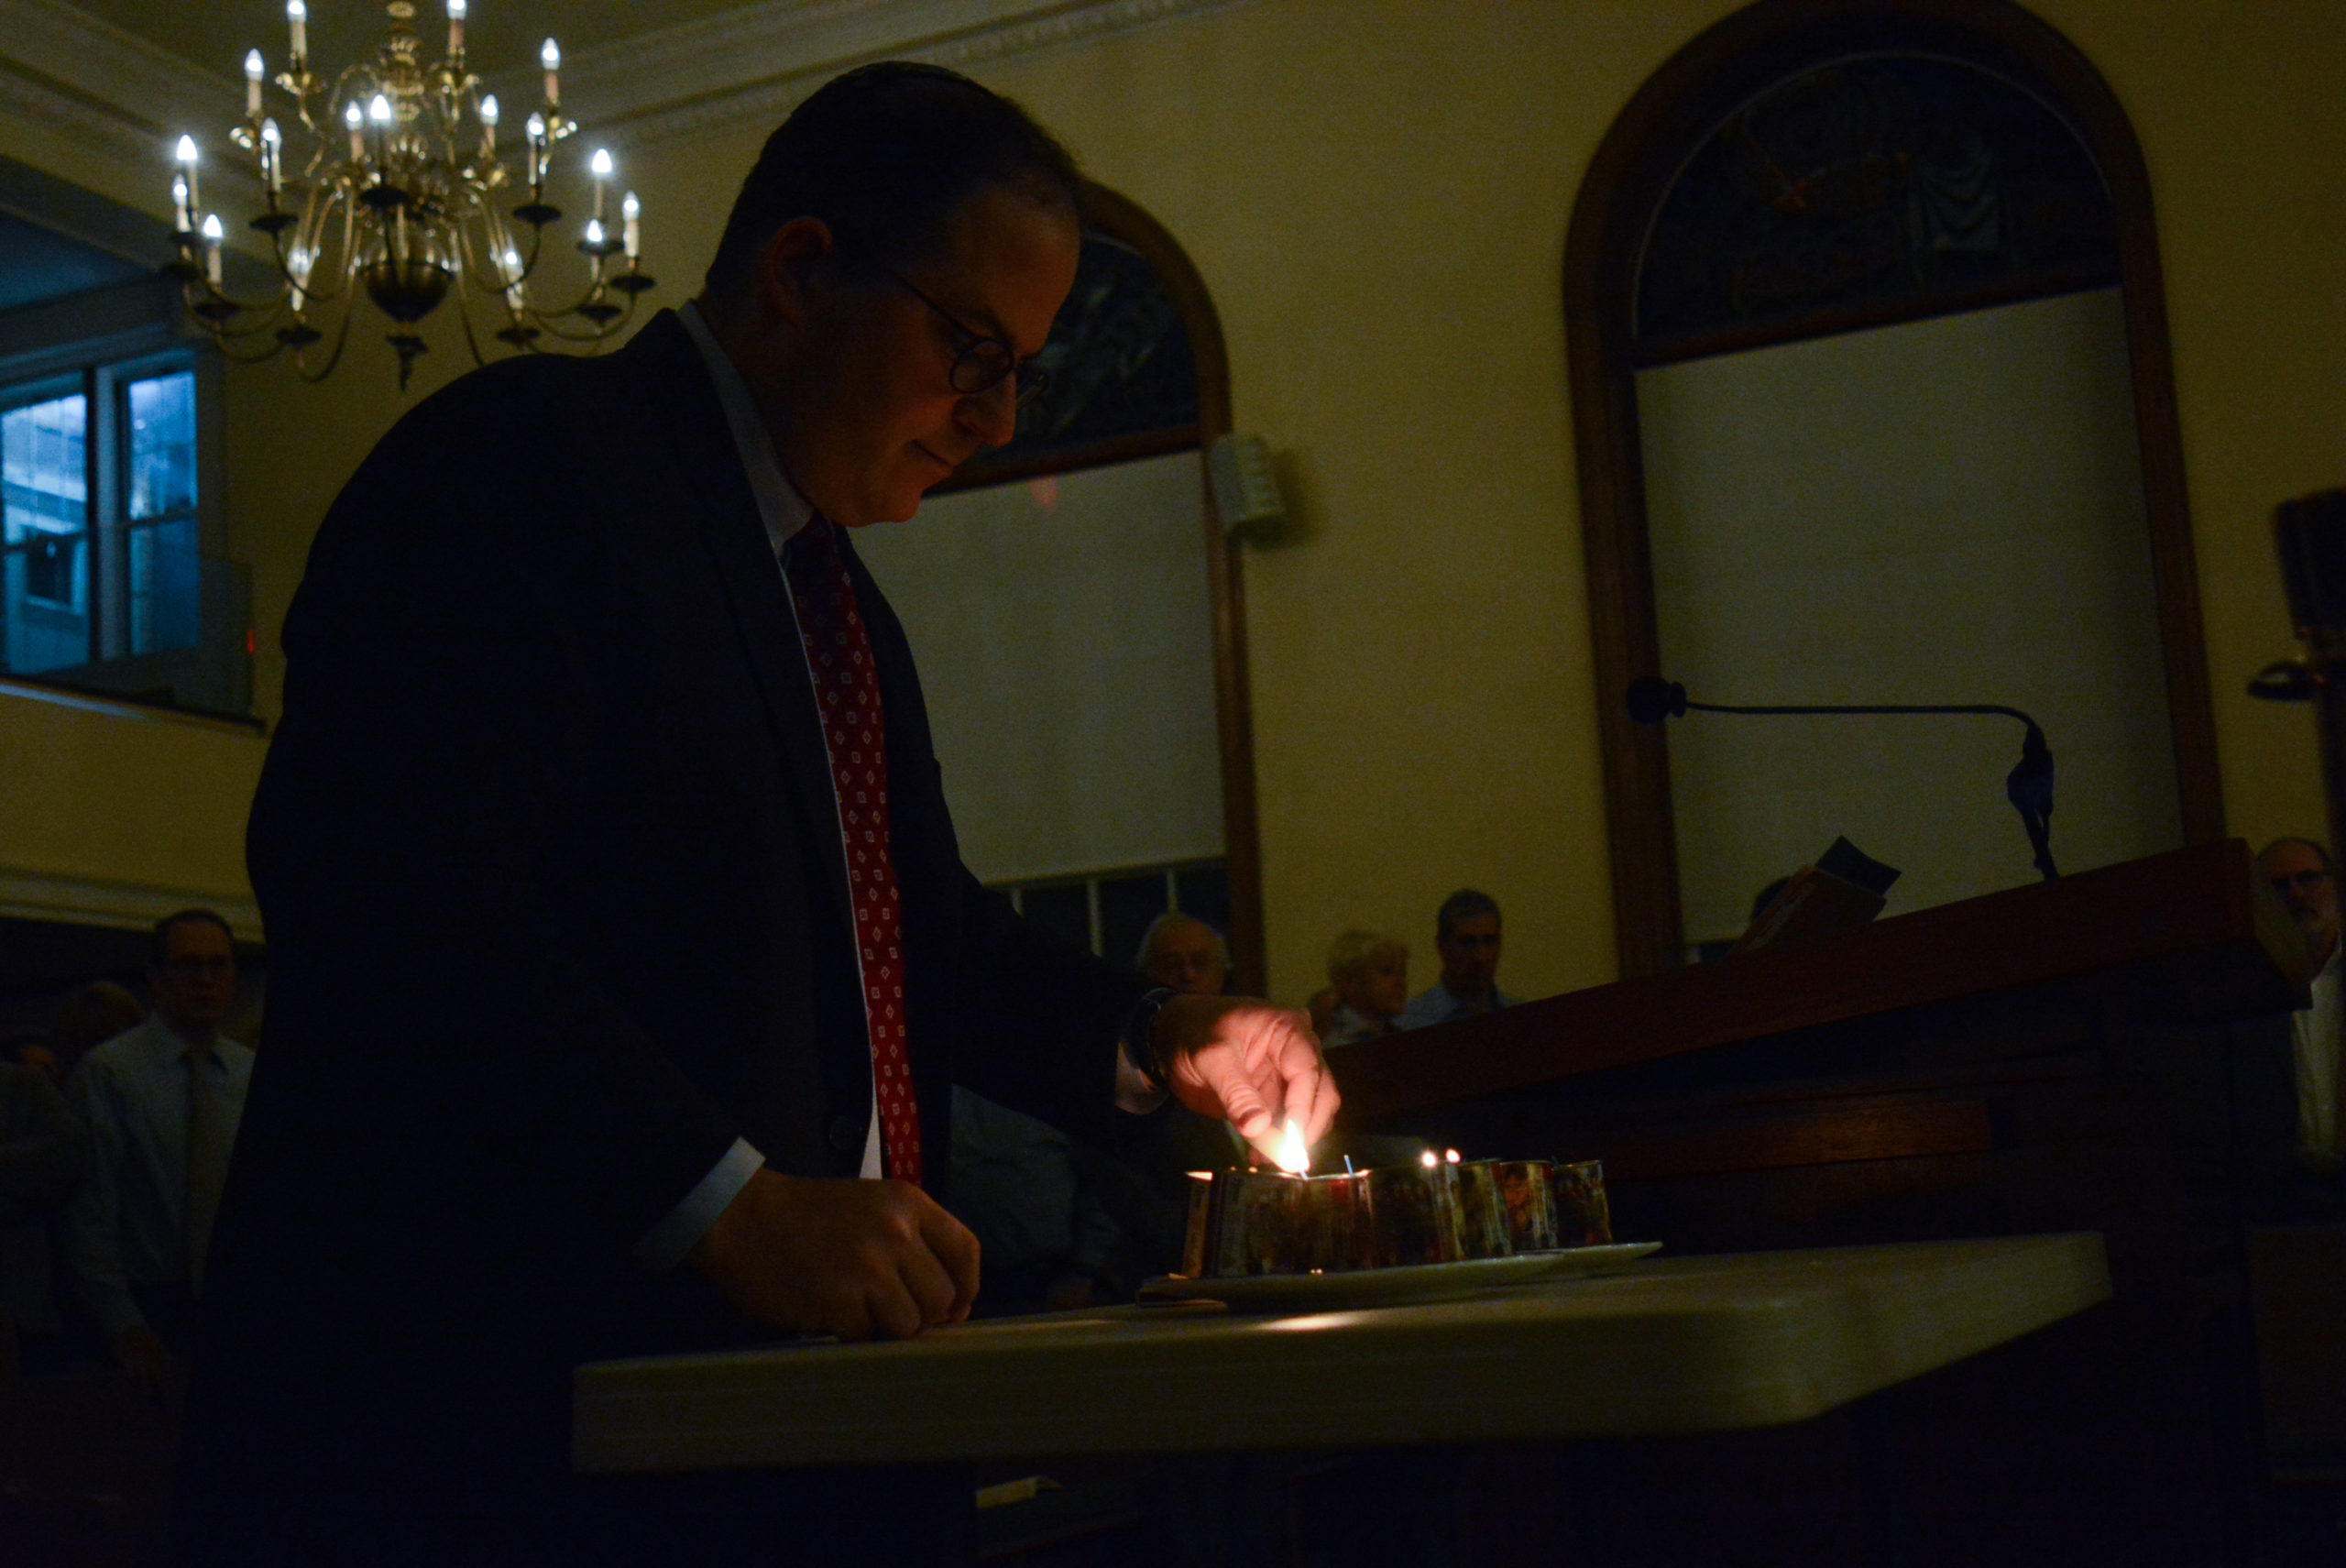 Rabbi Daniel Schweber of Temple Israel lights candles to honor the 11 people killed in the Tree of Life Congregation shooting. (Photo by Janelle Clausen)